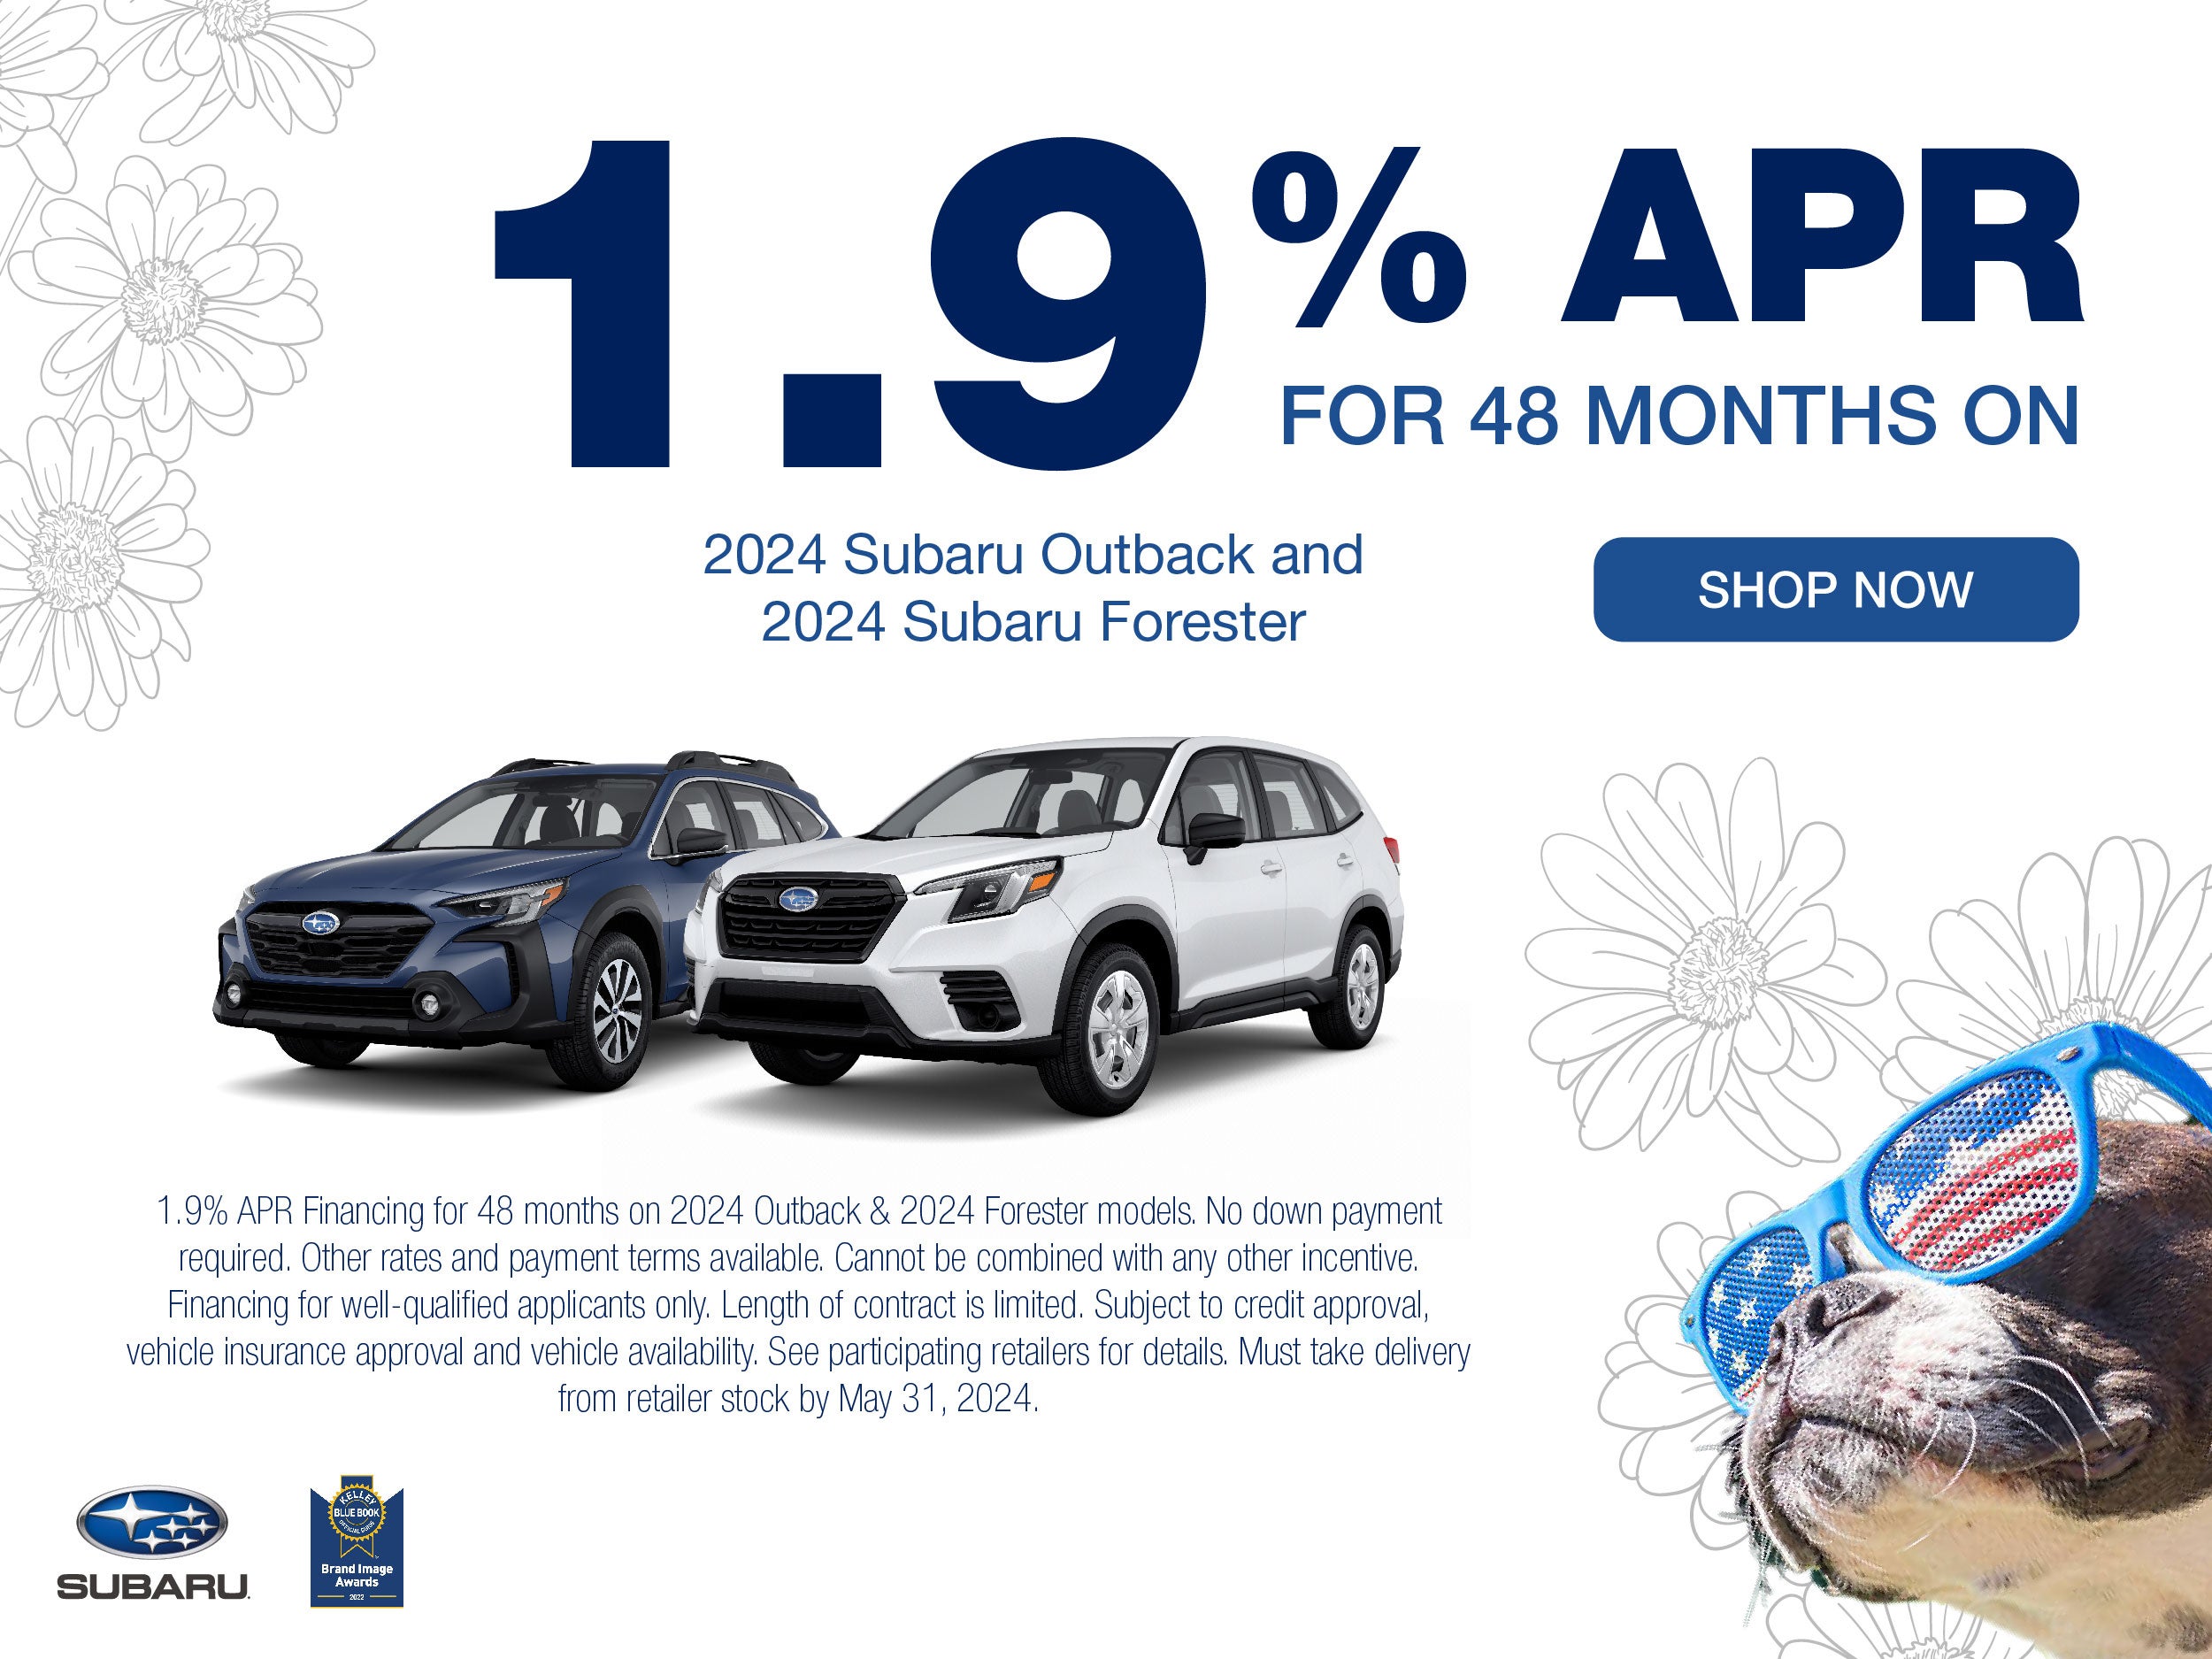 1.9%_APR_48 Months_2024_Subaru_Outback_Forester